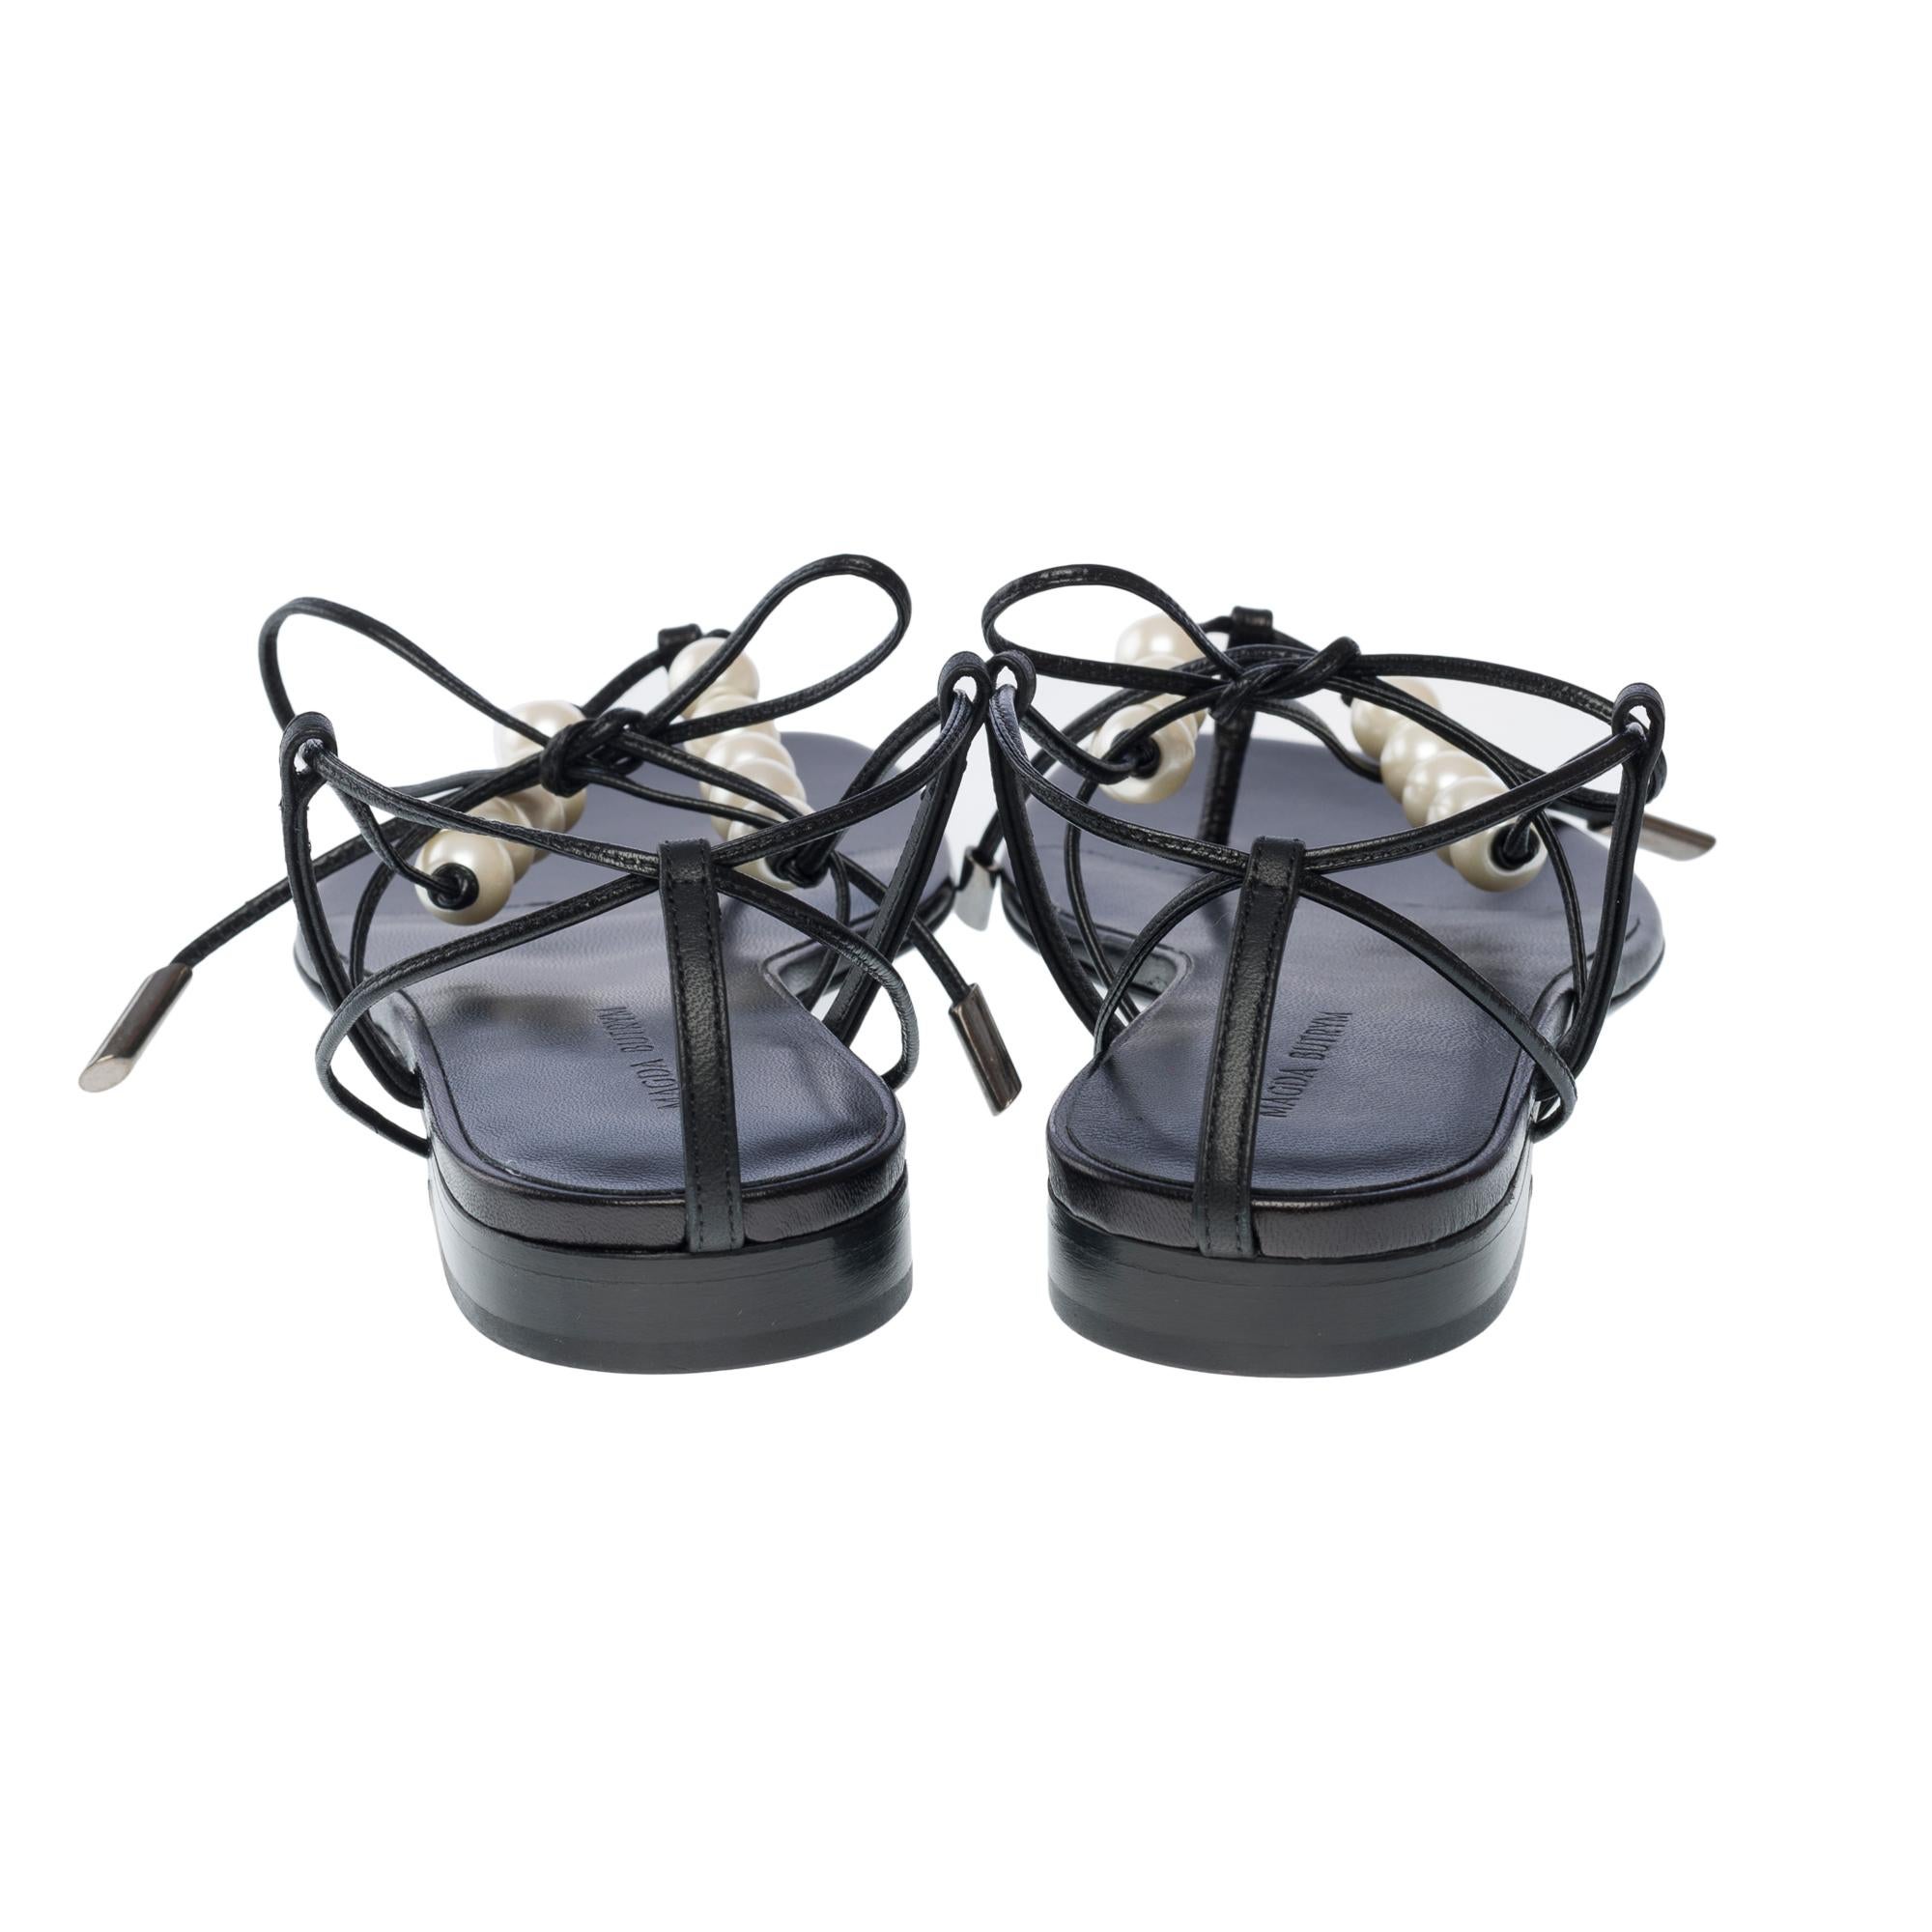 Women's New Magda Butrym Flat Sandals  in black leather and faux-pearl , Size 38 For Sale